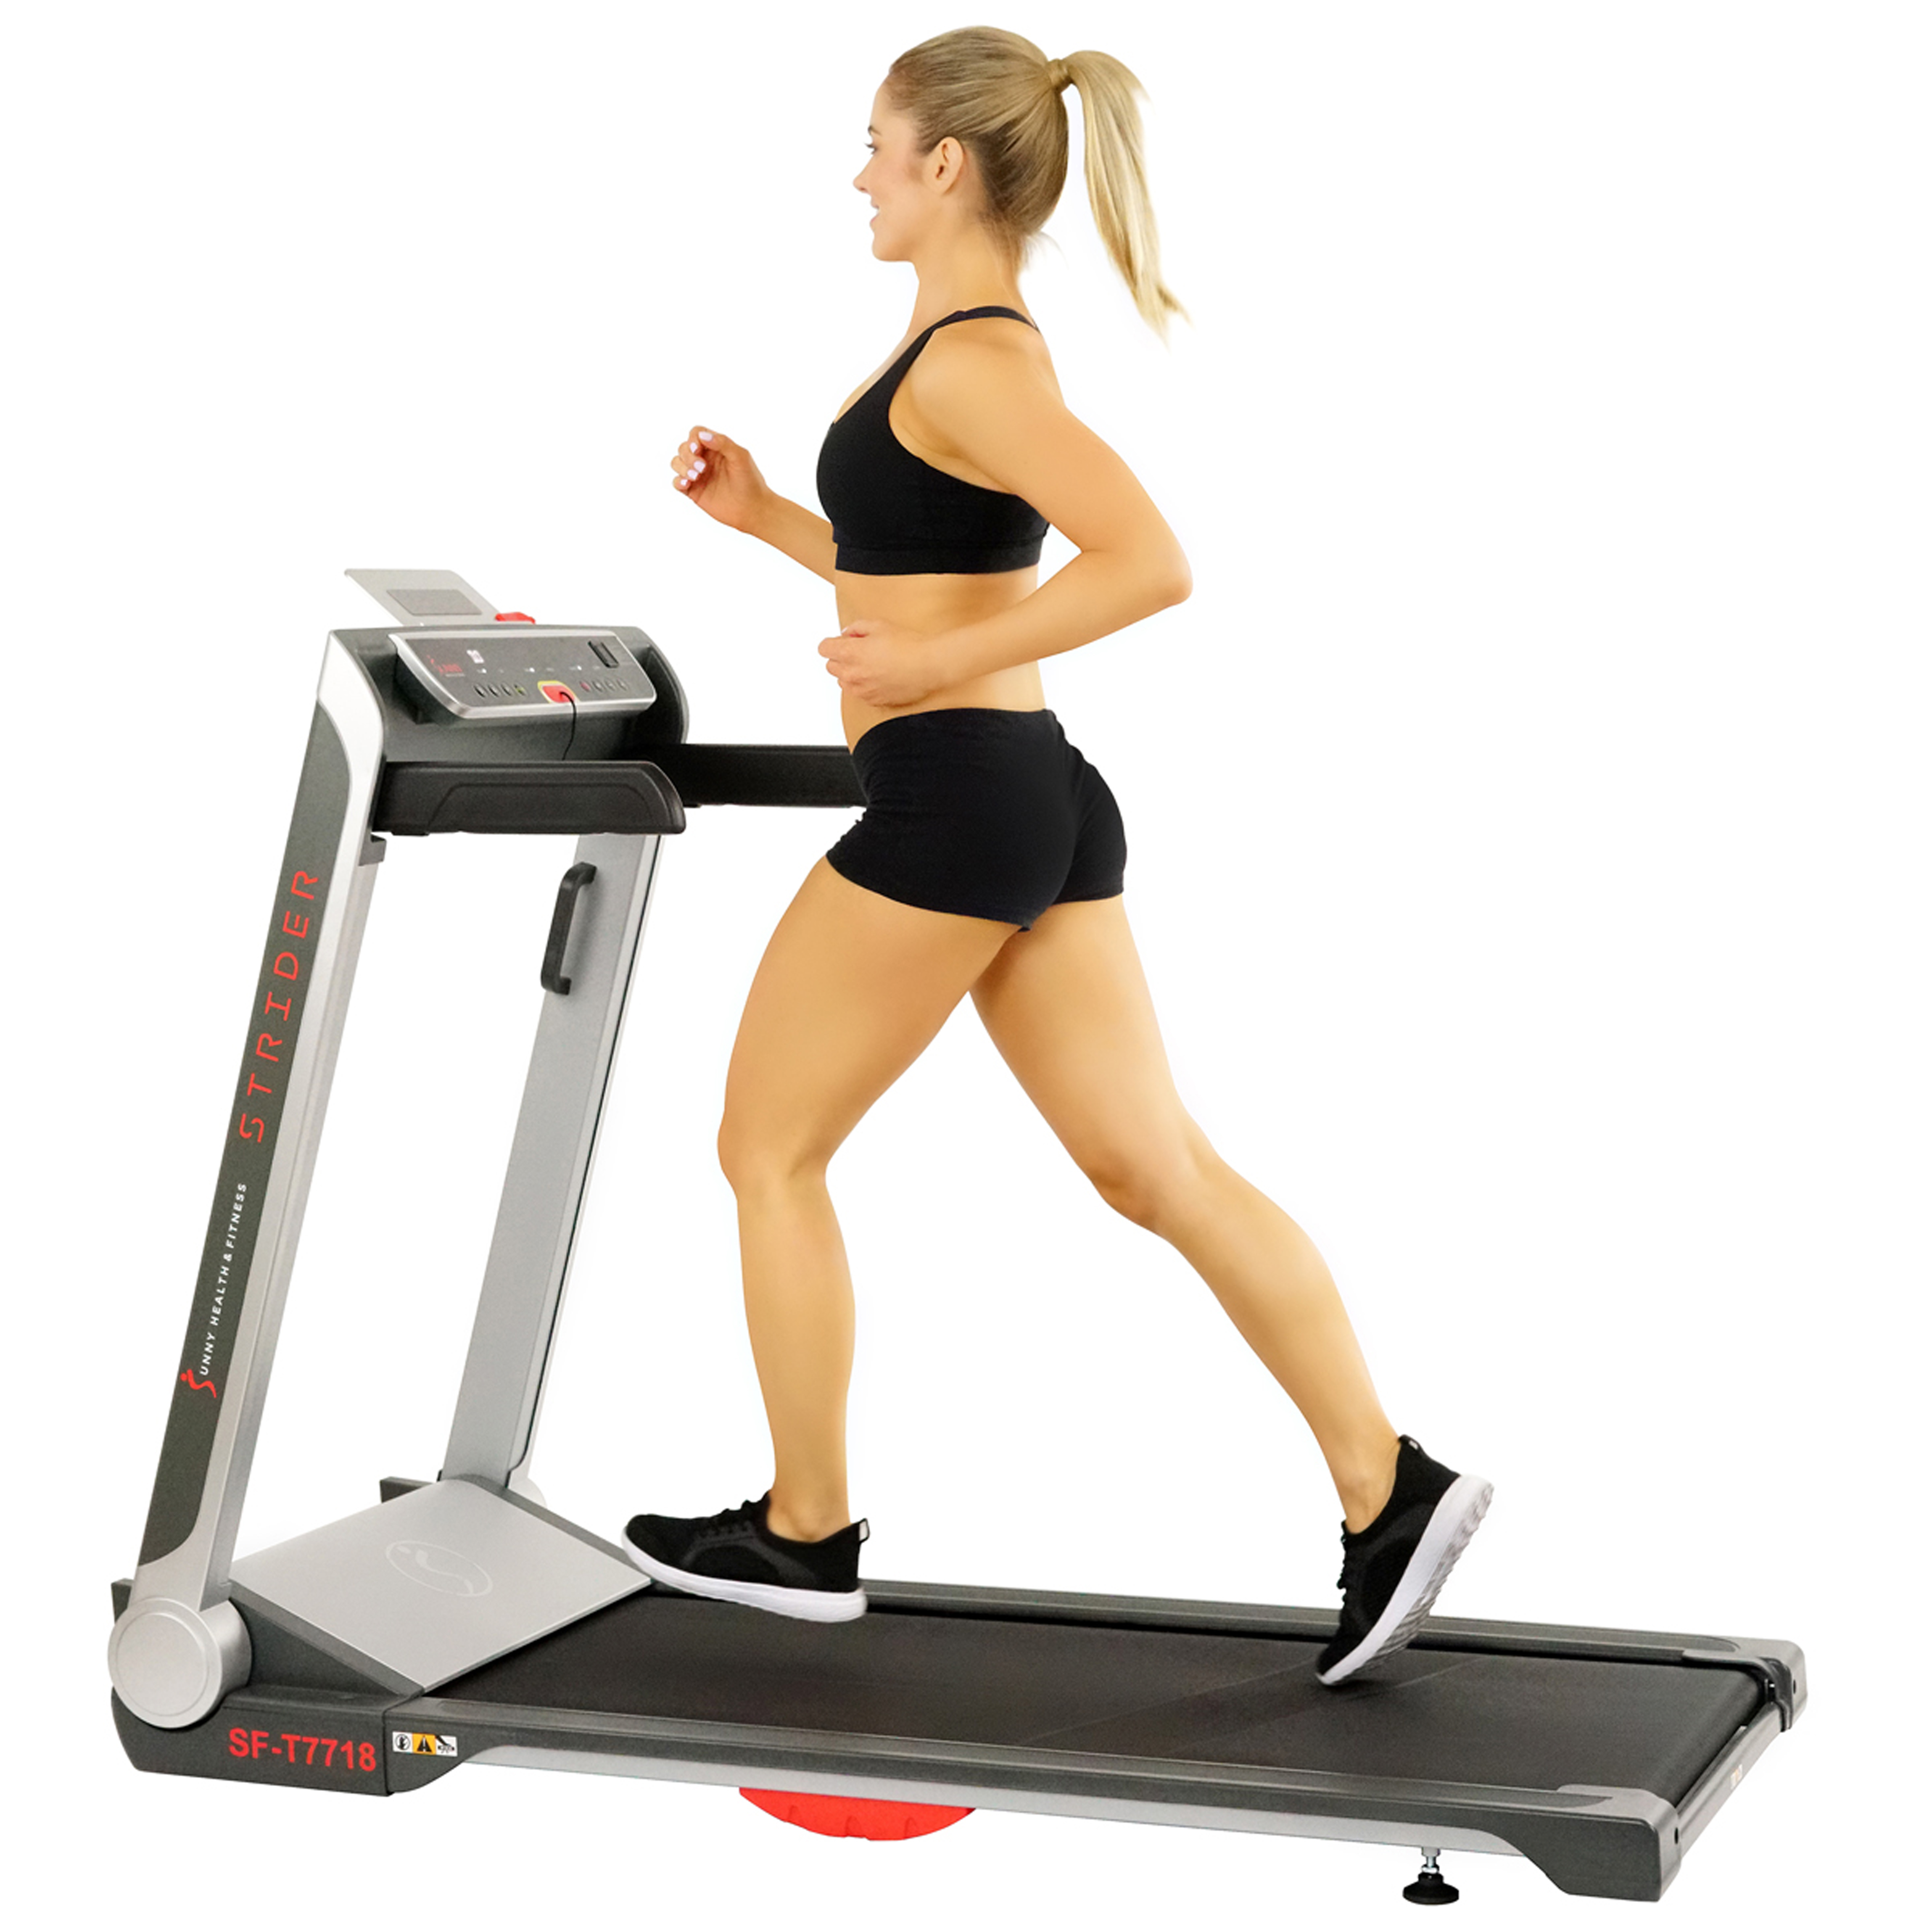 Sunny Health & Fitness Motorized Folding Running Treadmill, 20" Wide Belt, Flat Folding & Low Profile for Portability with Speakers for USB and AUX Audio Connection - Strider, SF-T7718 - image 1 of 9